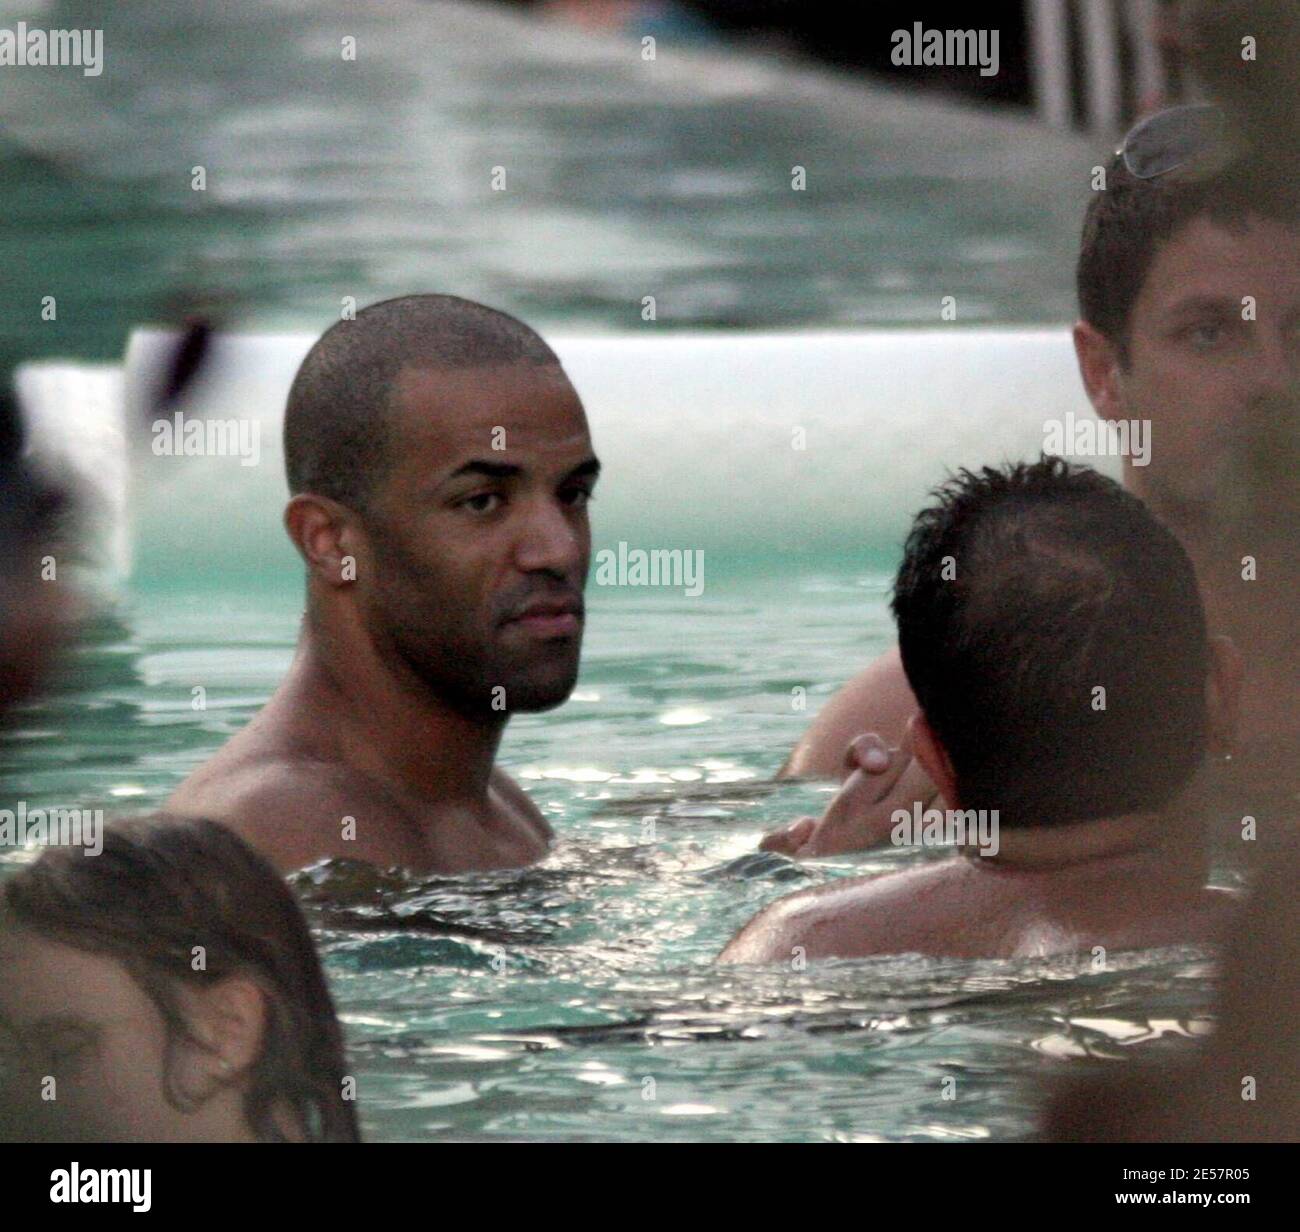 Exclusive!! British singer Craig David shows off his new buff body hanging  pool side in Miami Beach, Fl. 01/01/07 [[ral]] Stock Photo - Alamy